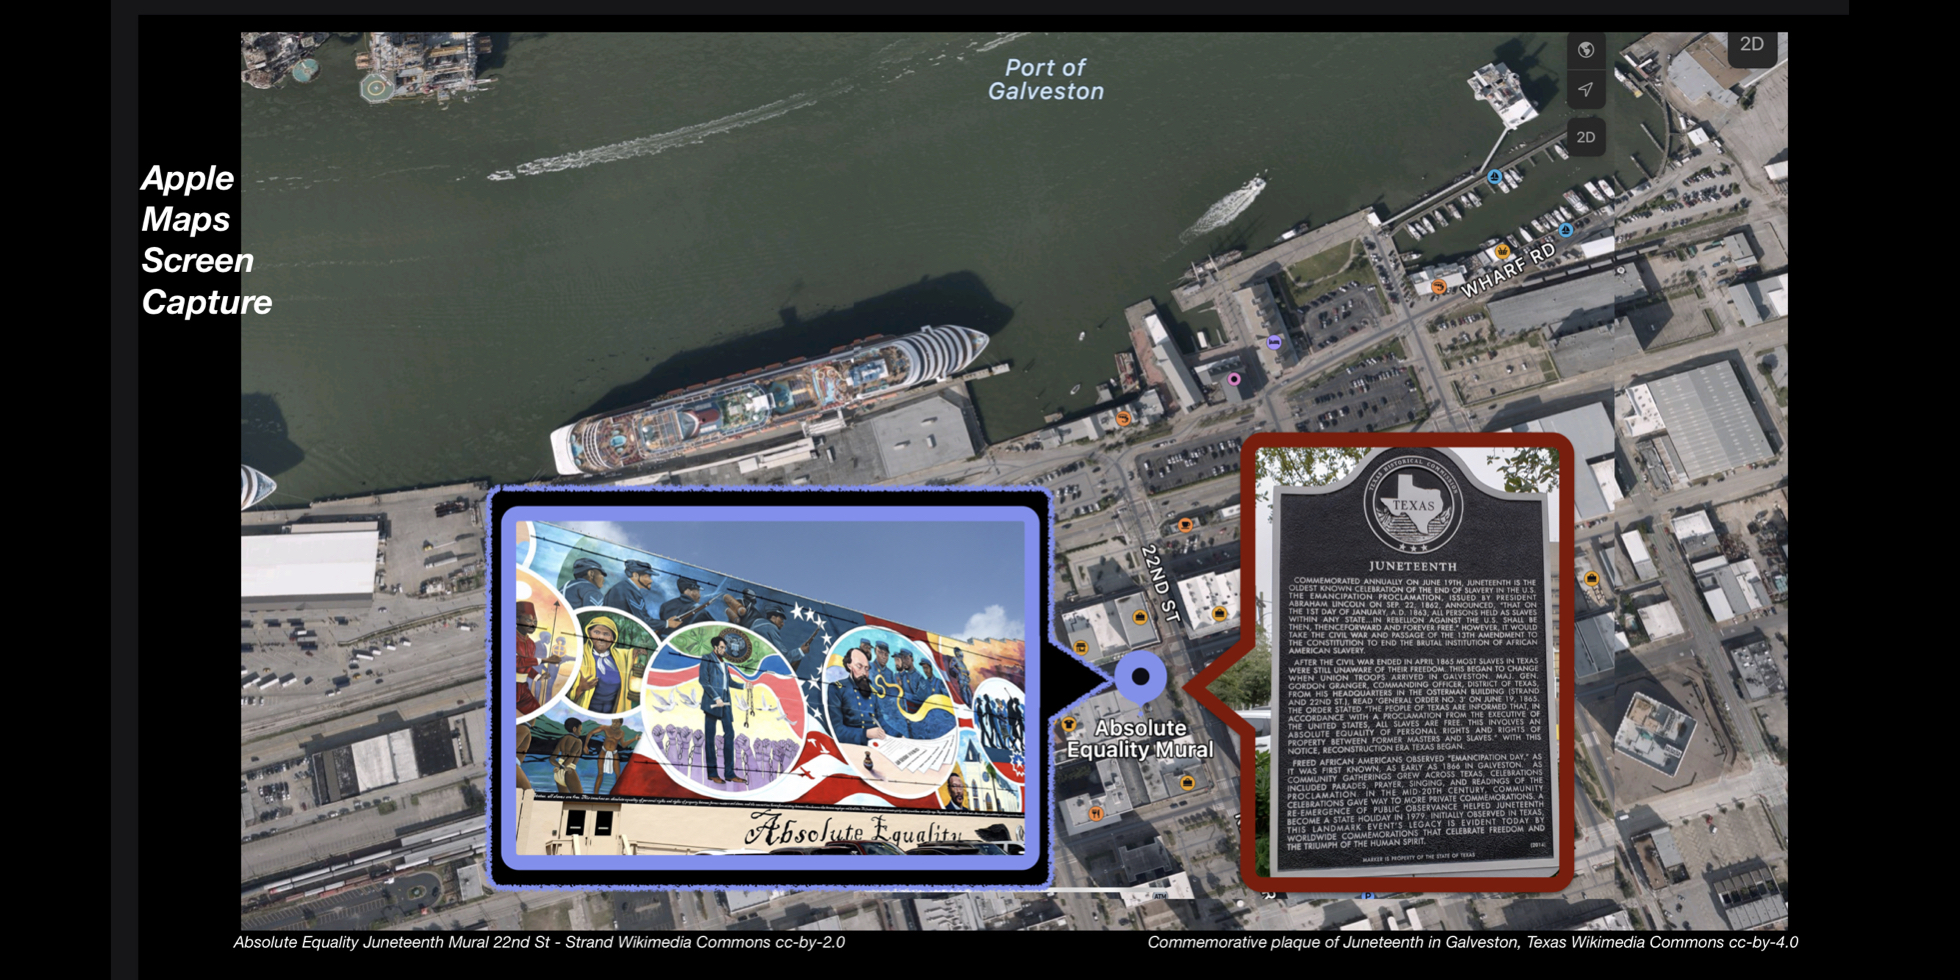 Apple Maps screen shot of location of announcement of the Emancipation Proclamation in Galveston Texas.